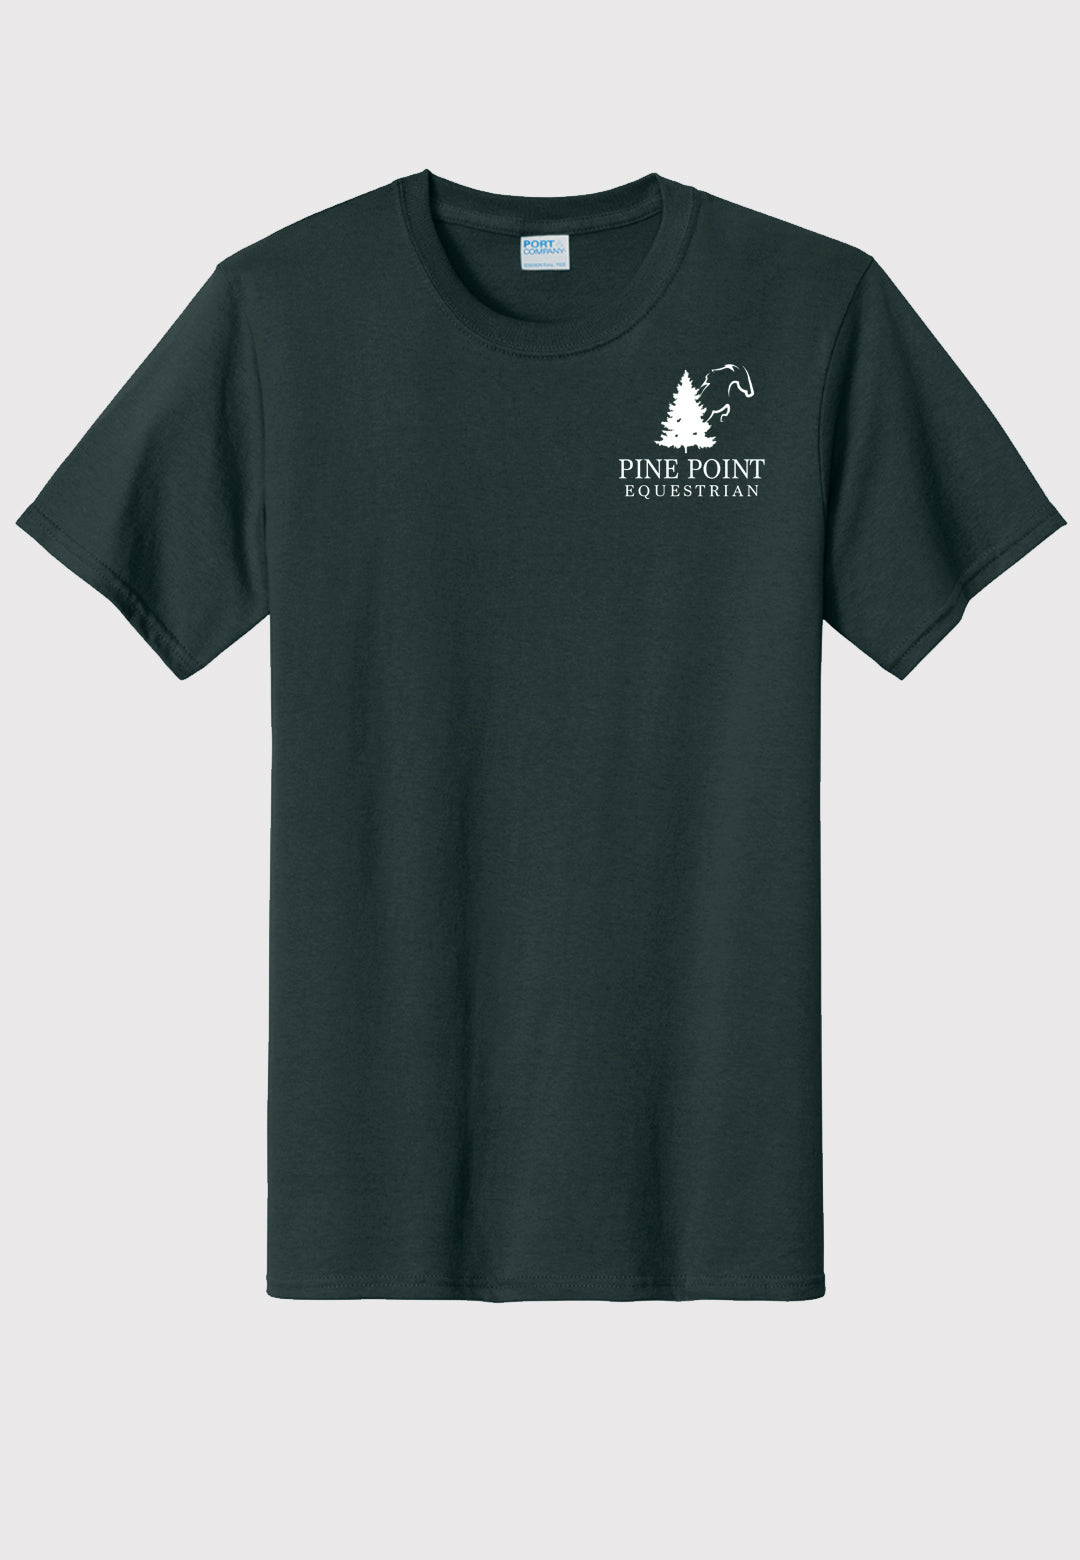 Pine Point Equestrian Port & Company® Essential Tee - Adult + youth sizes